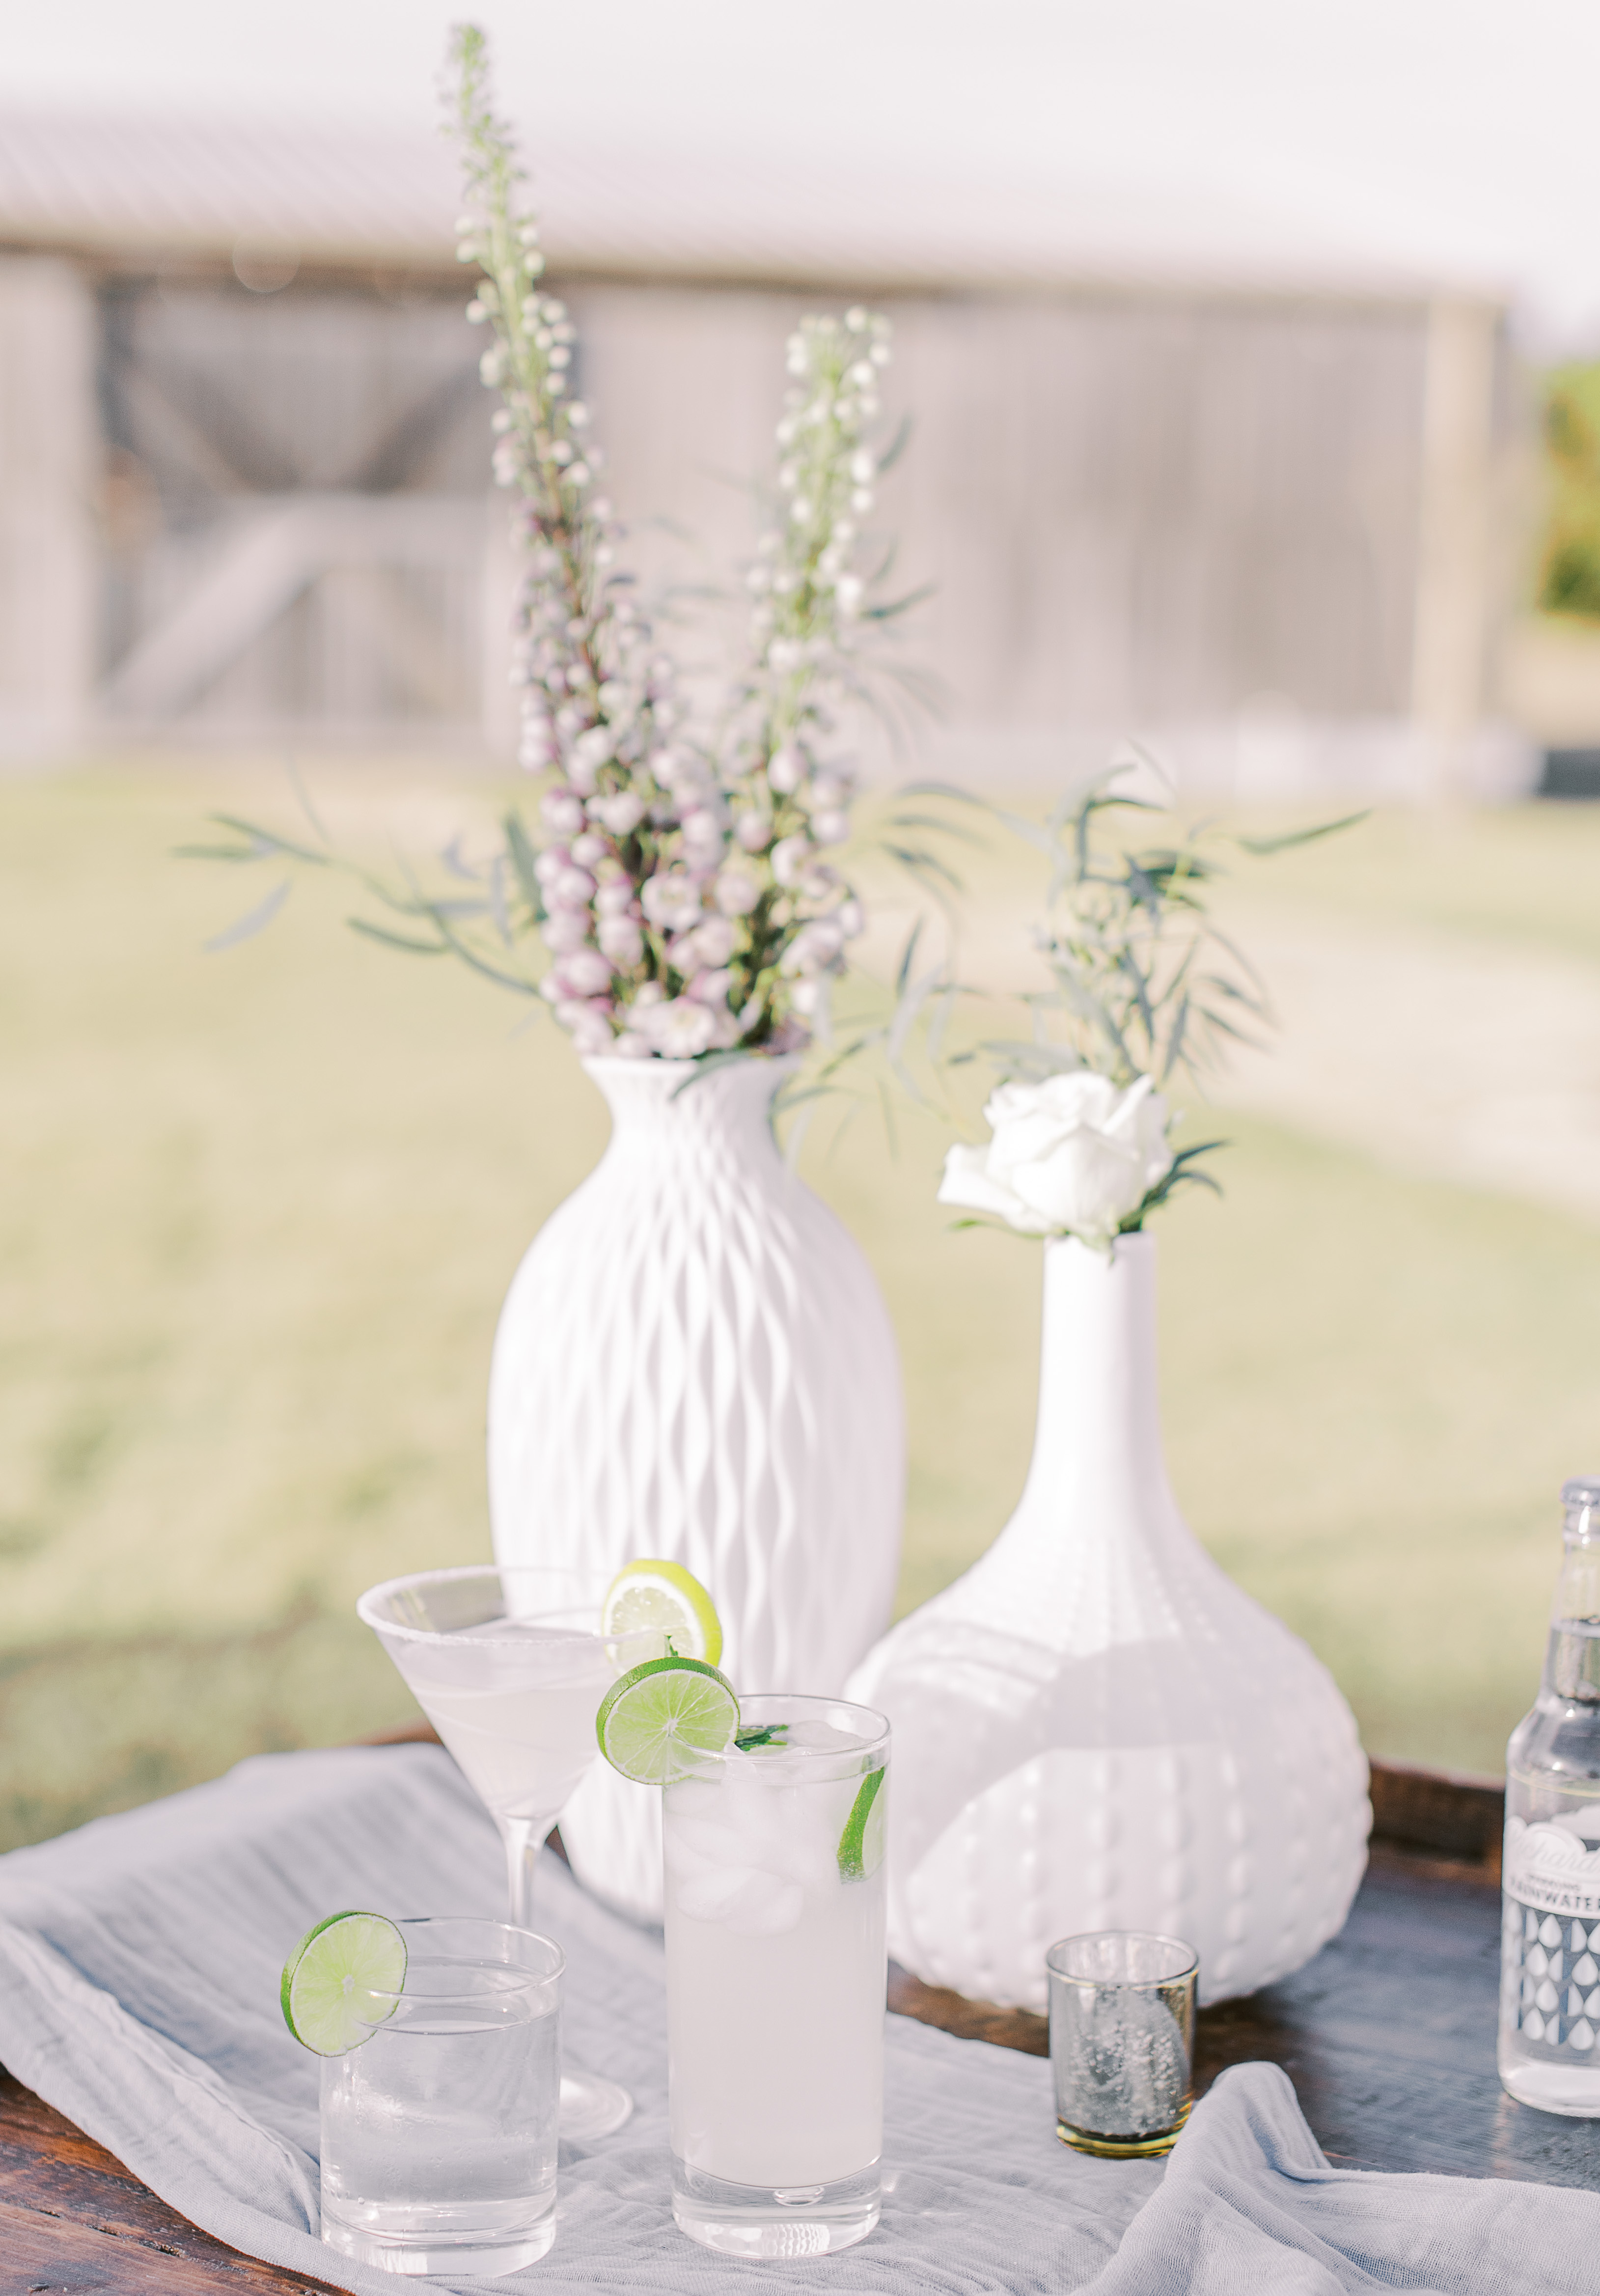 Three cocktails with lemons and limes are set up outside for a sunlit hill country wedding editorial in Dripping Springs, TX.